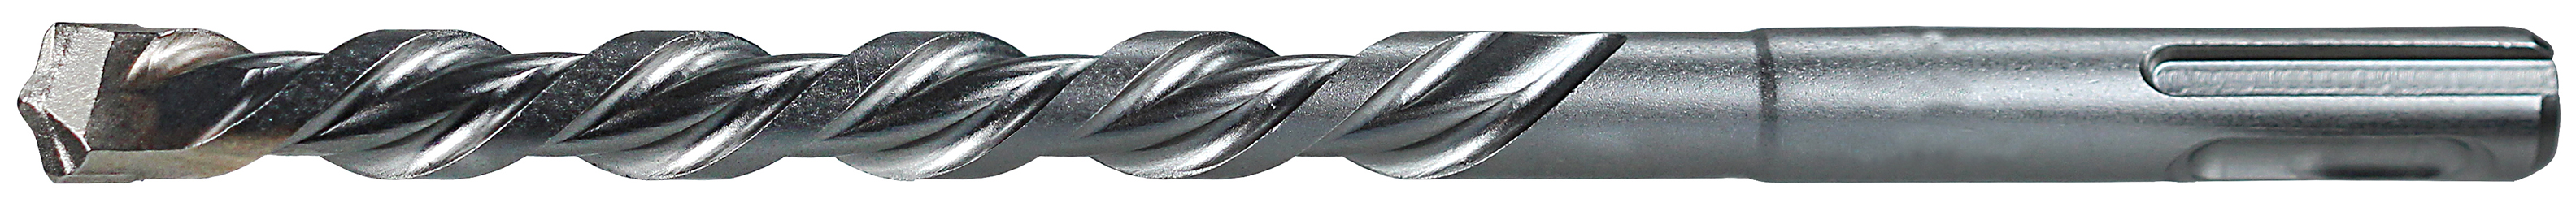 Rotary Hammer Drill Bit, 3/16 in. bit diameter, 10 in. overall length, Straight shank type, 3 flutes, Tip-Carbide material, 8 in. drilling depth